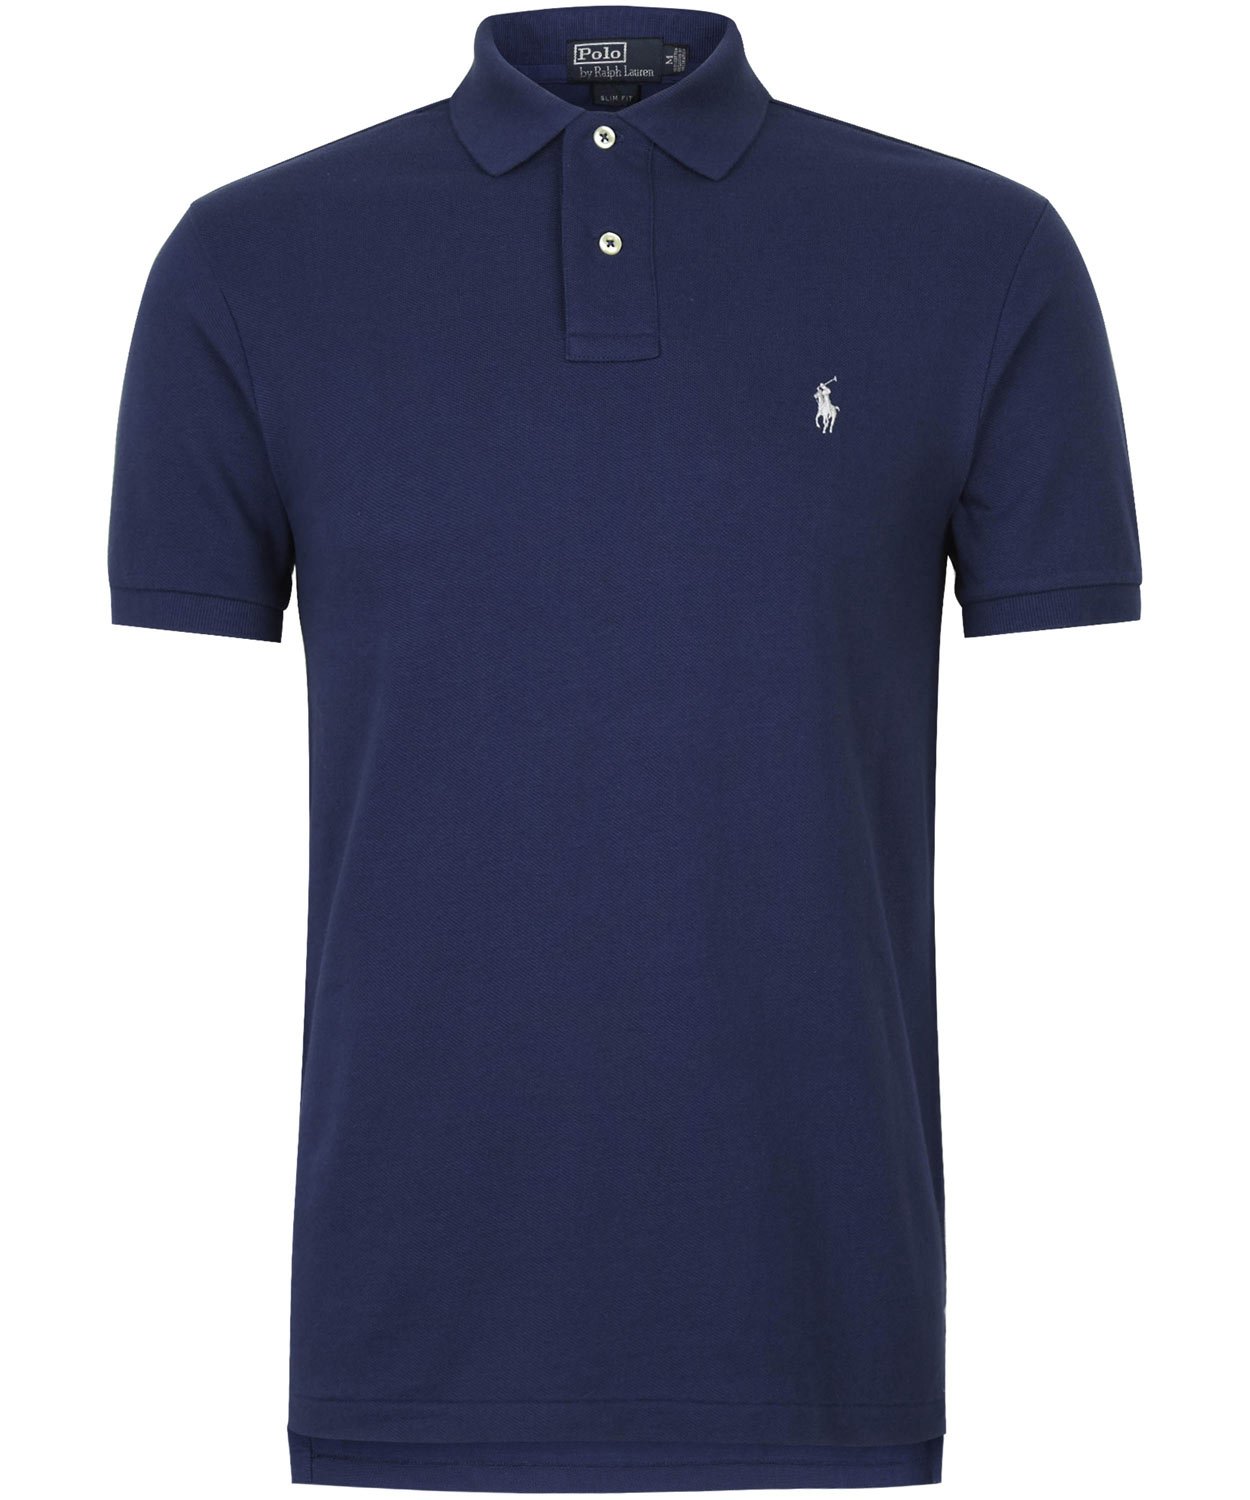 Polo Ralph Lauren Navy Slim Fit Cotton Polo Shirt in Blue for Men - Lyst